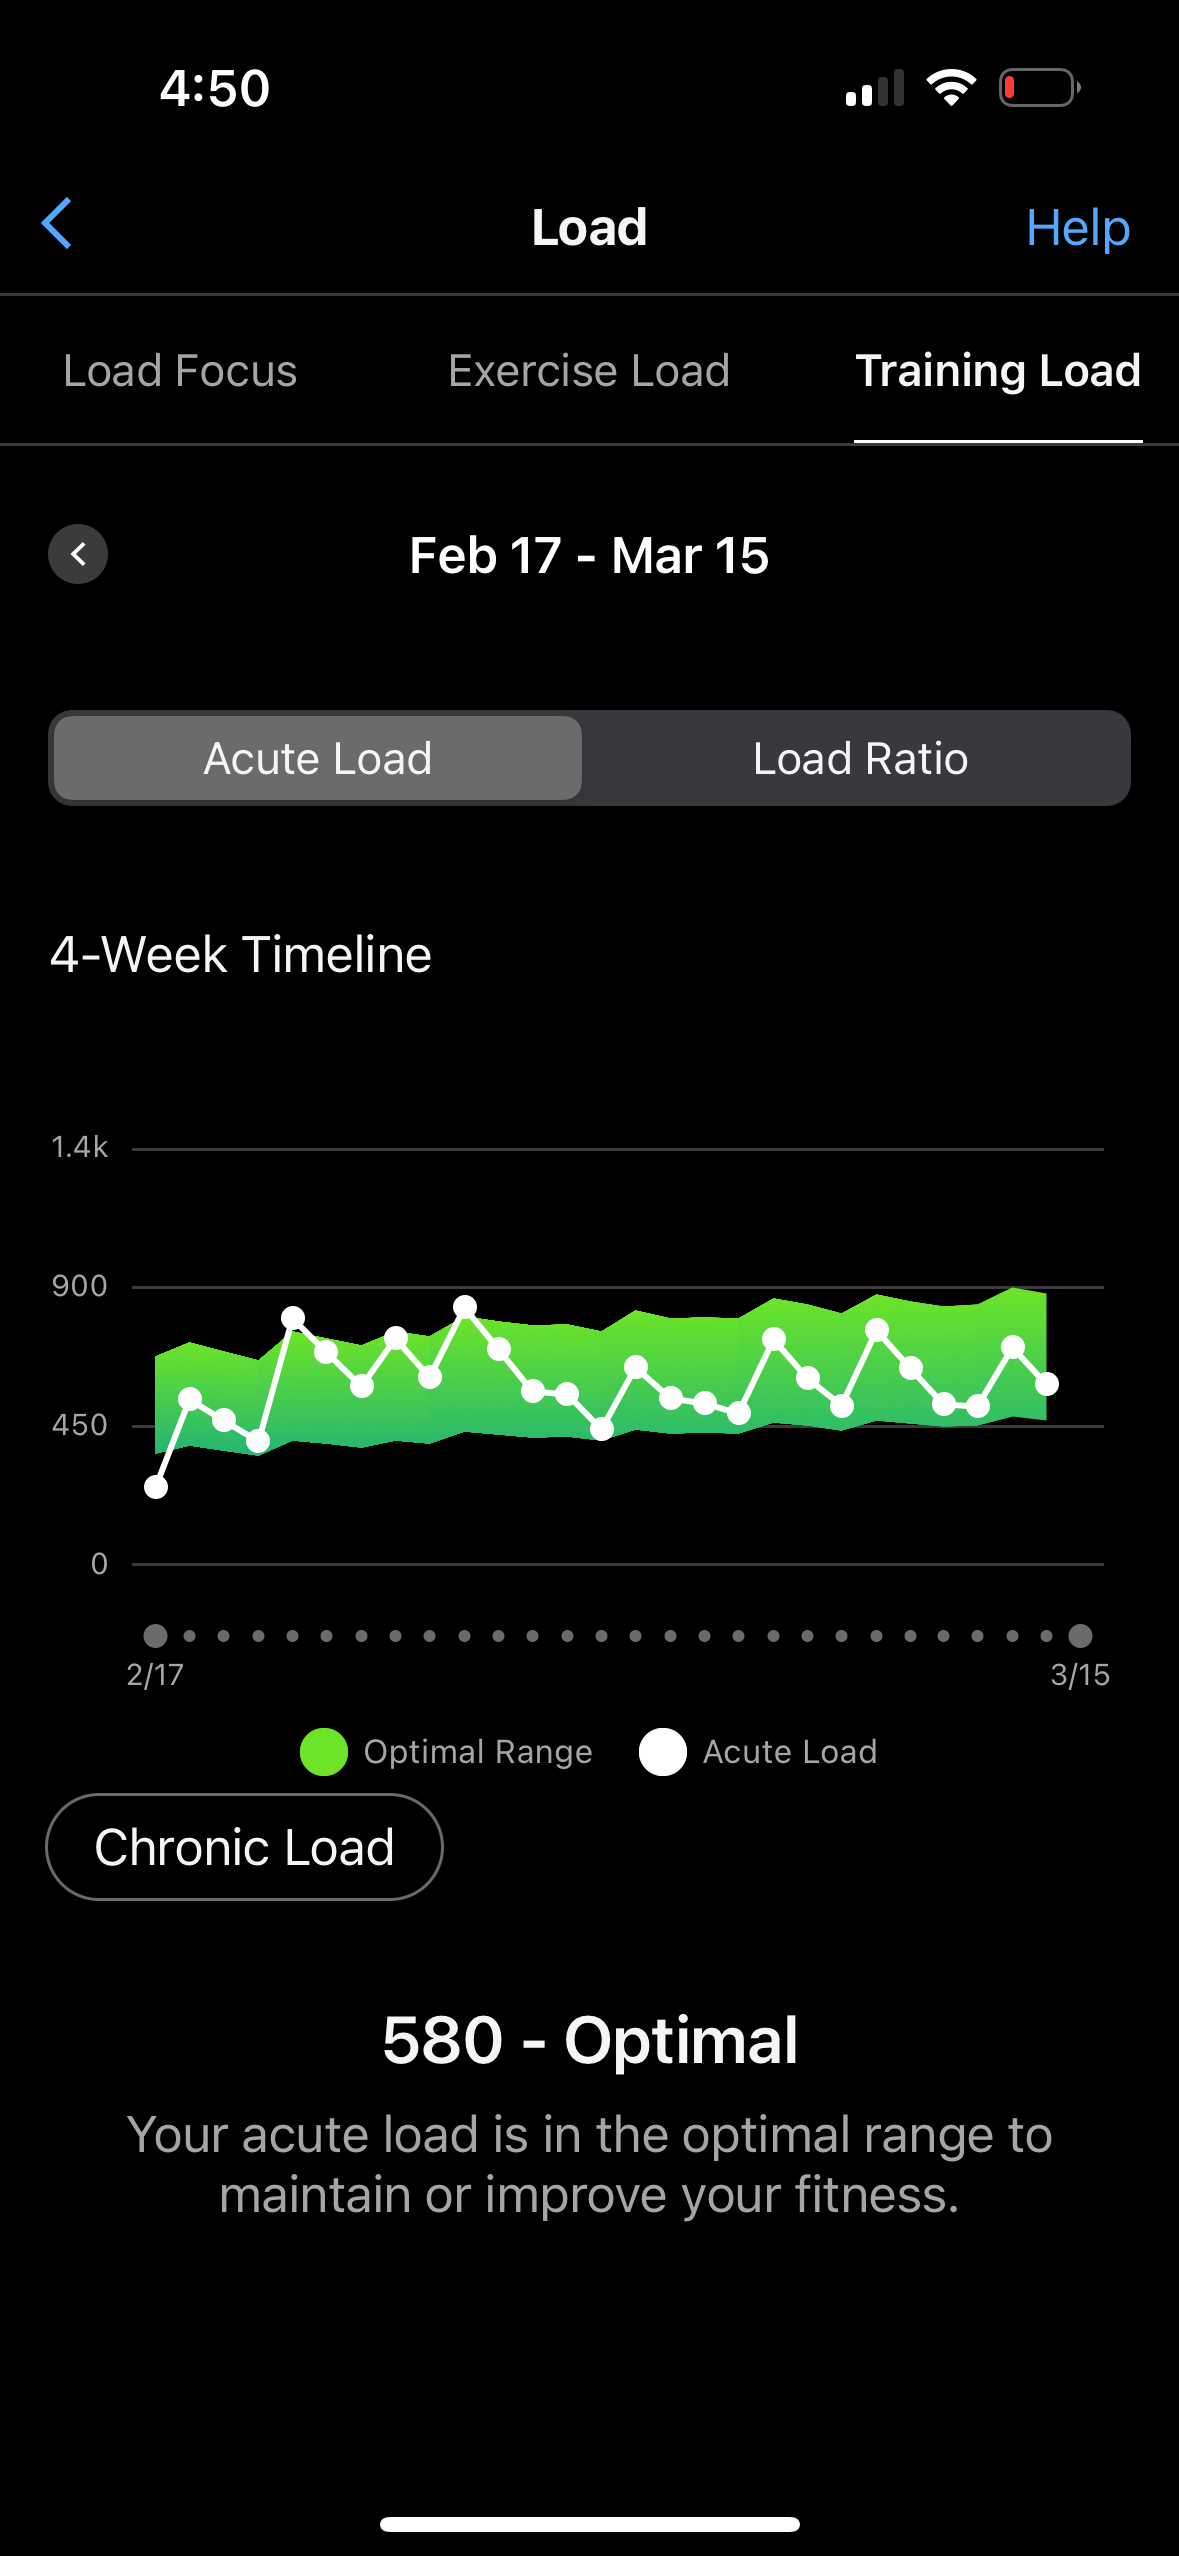 A screenshot of the Garmin Connect app showing the user's training load data over the past four weeks.